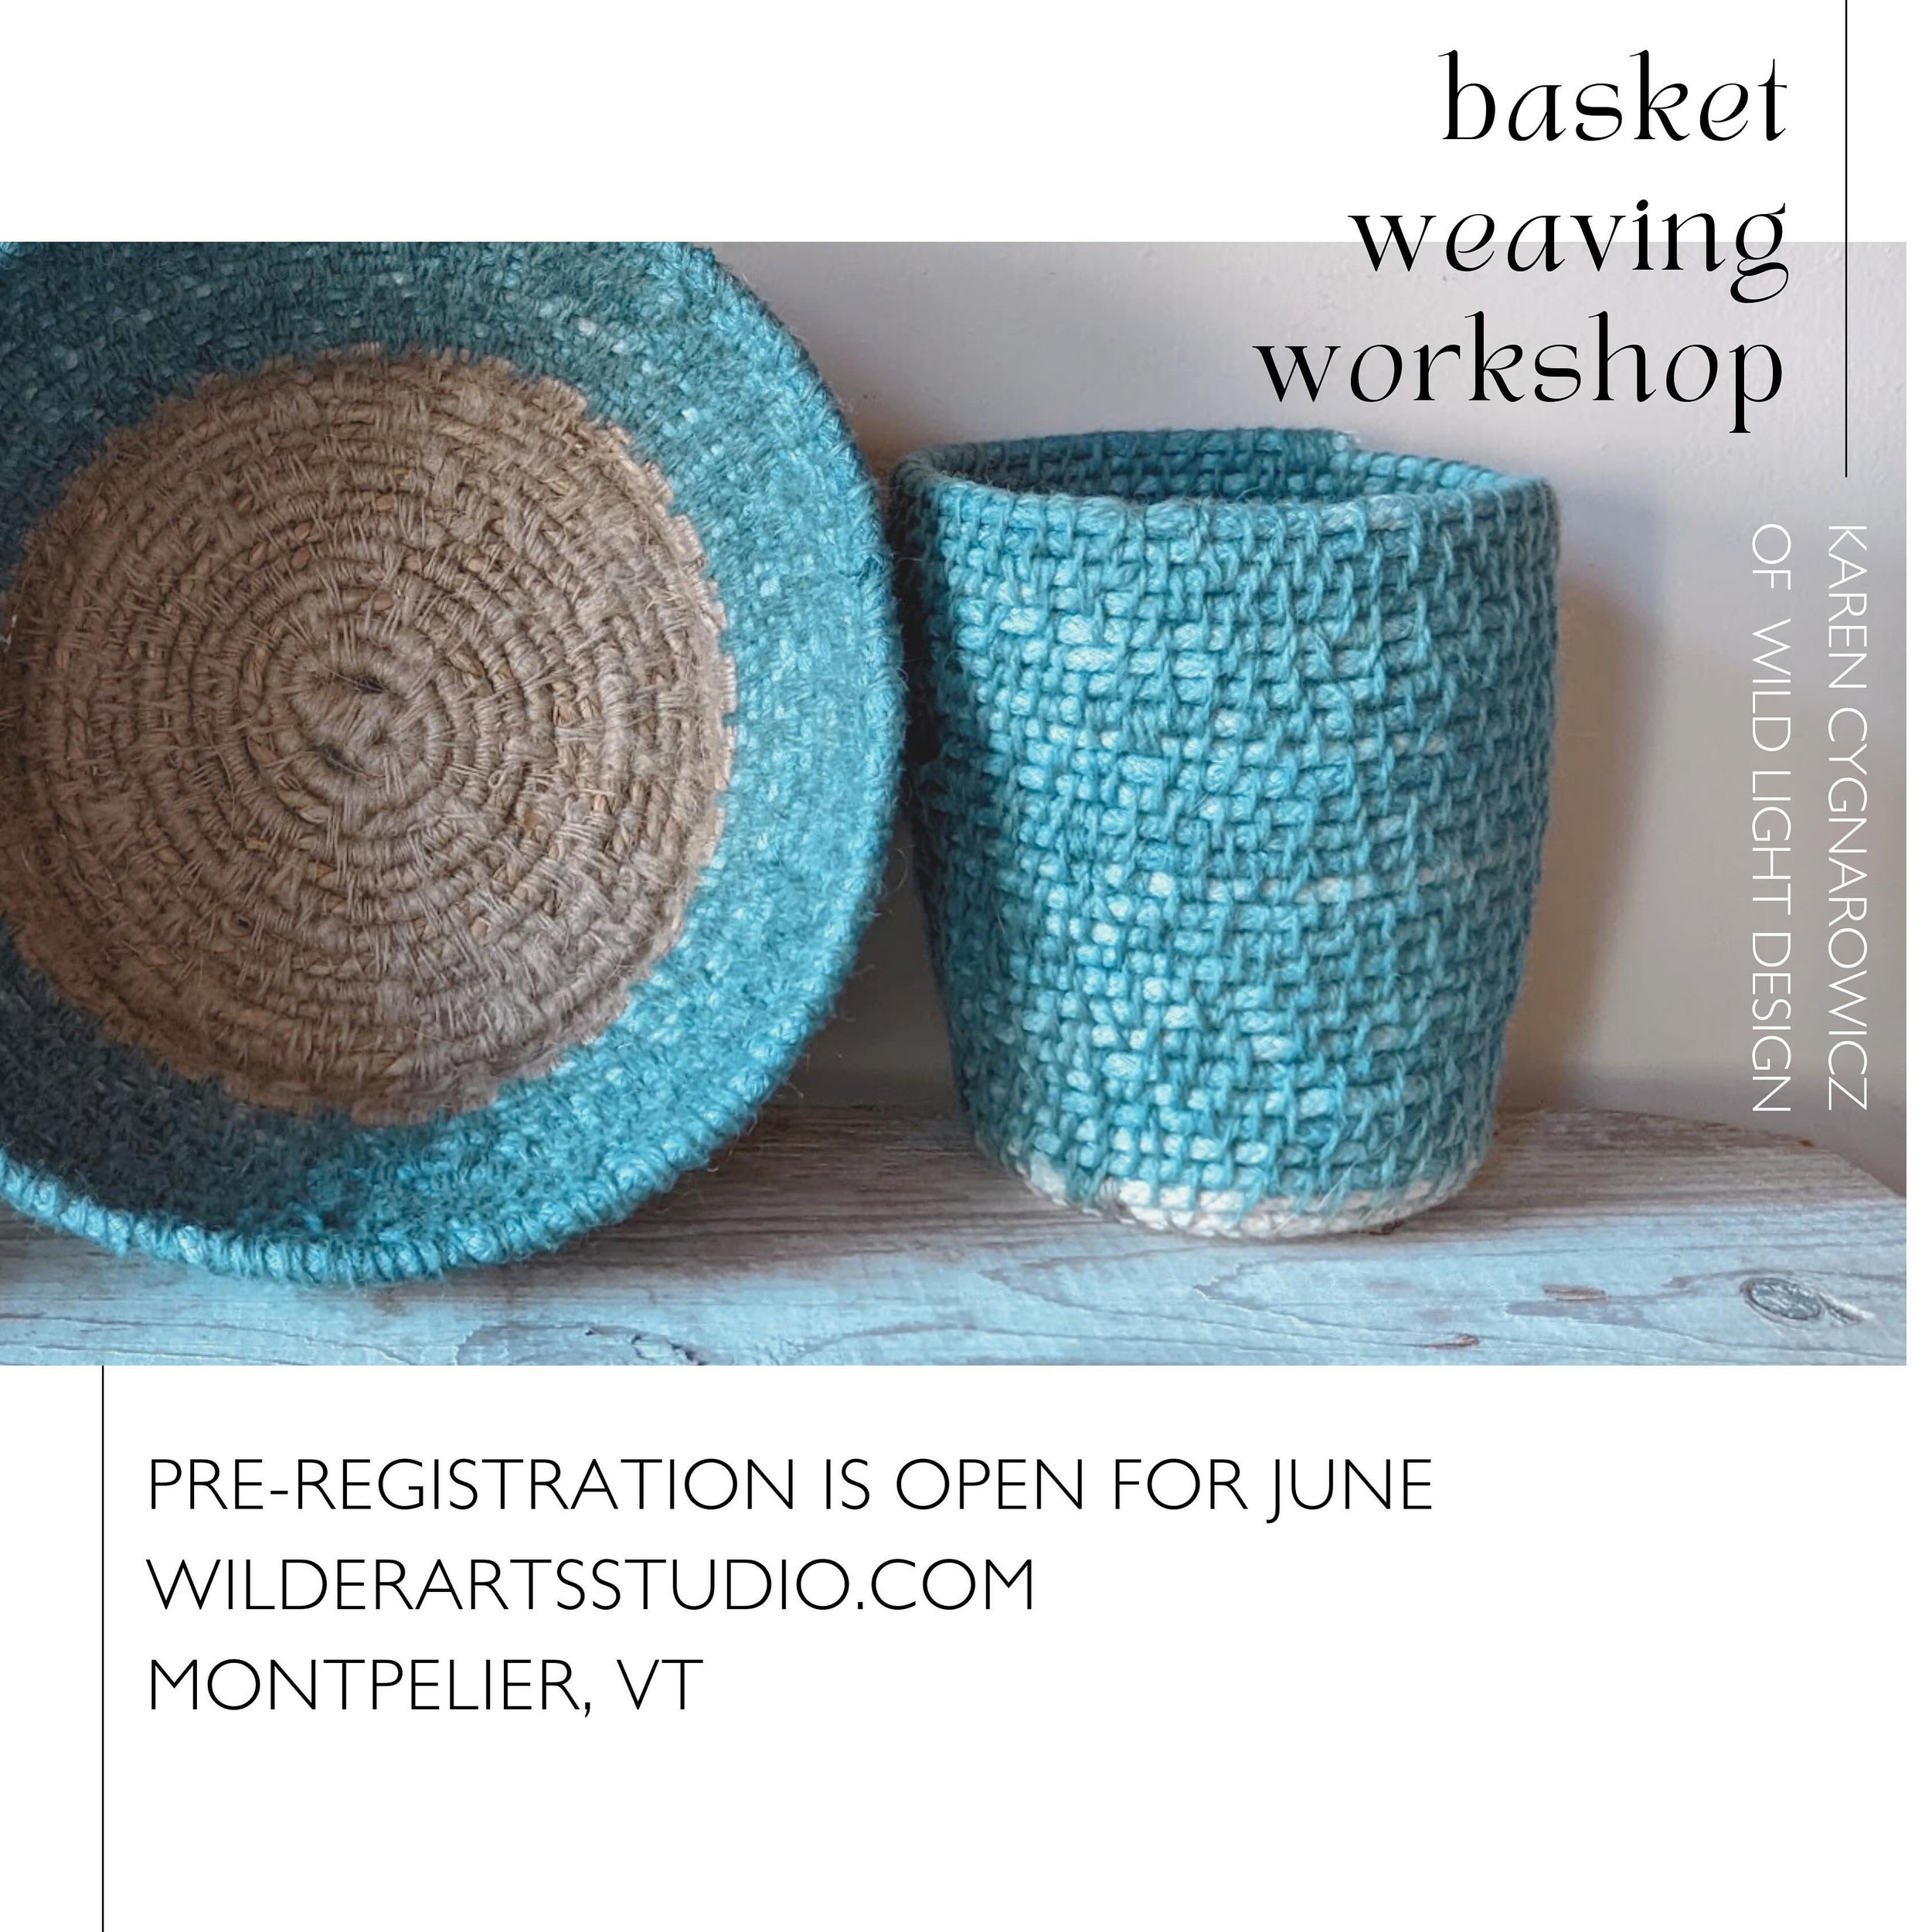 🌀🌀🌀🌀🌀🌀 

&mdash;&mdash;basket weaving workshop taught by yours truly in 📍Montpelier Vermont at the new location of this super cool art school, @wilderartsstudio now offering workshops for adults &mdash; no date set yet, pre-registration is ope